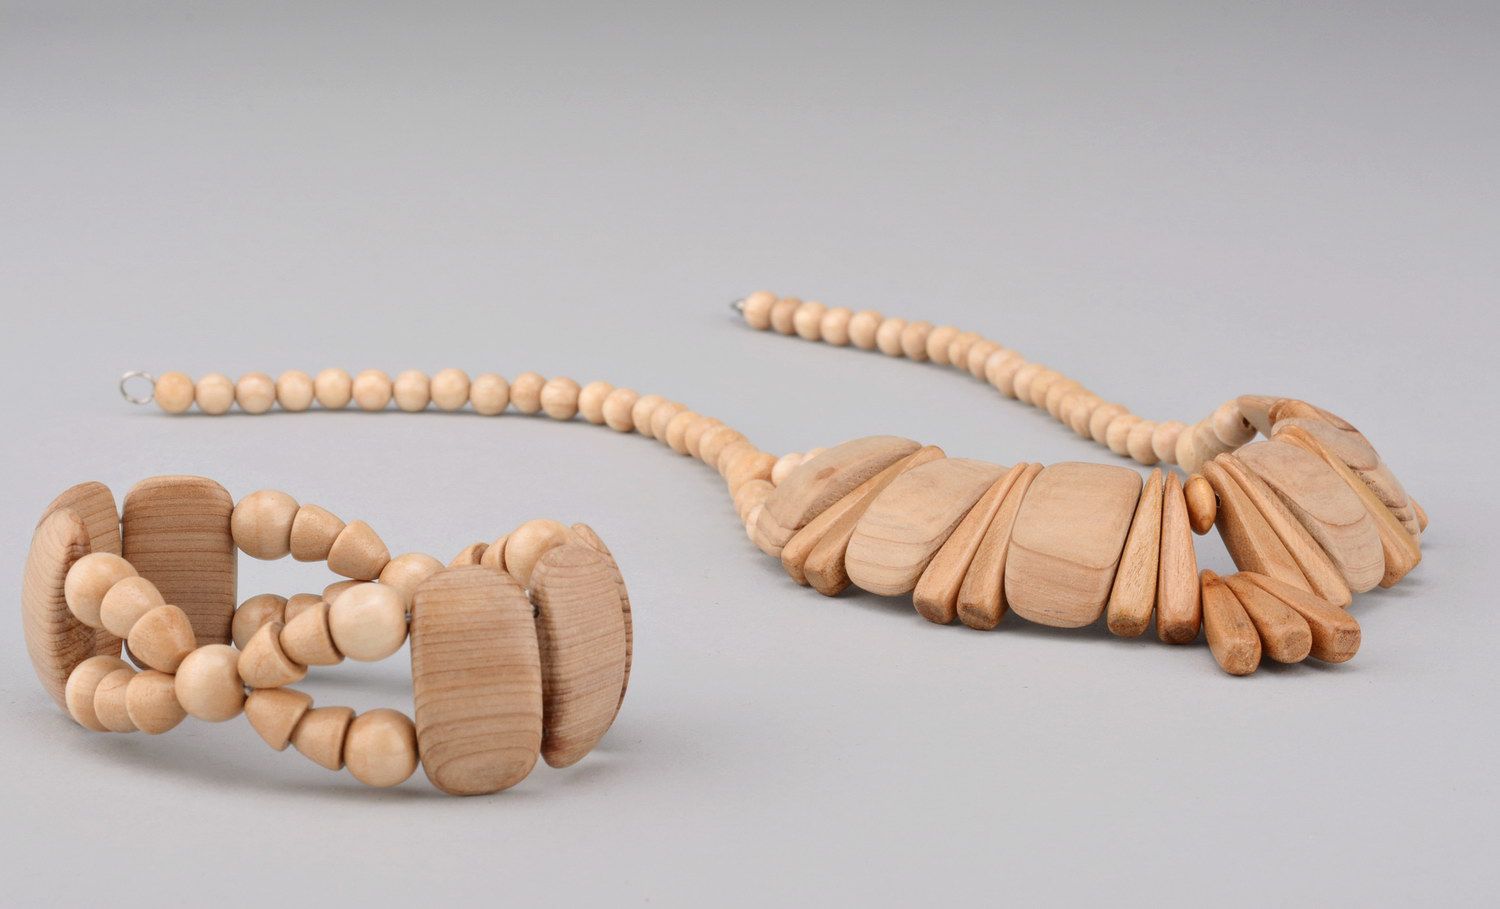 Bead necklace and bracelet made from light wood photo 1